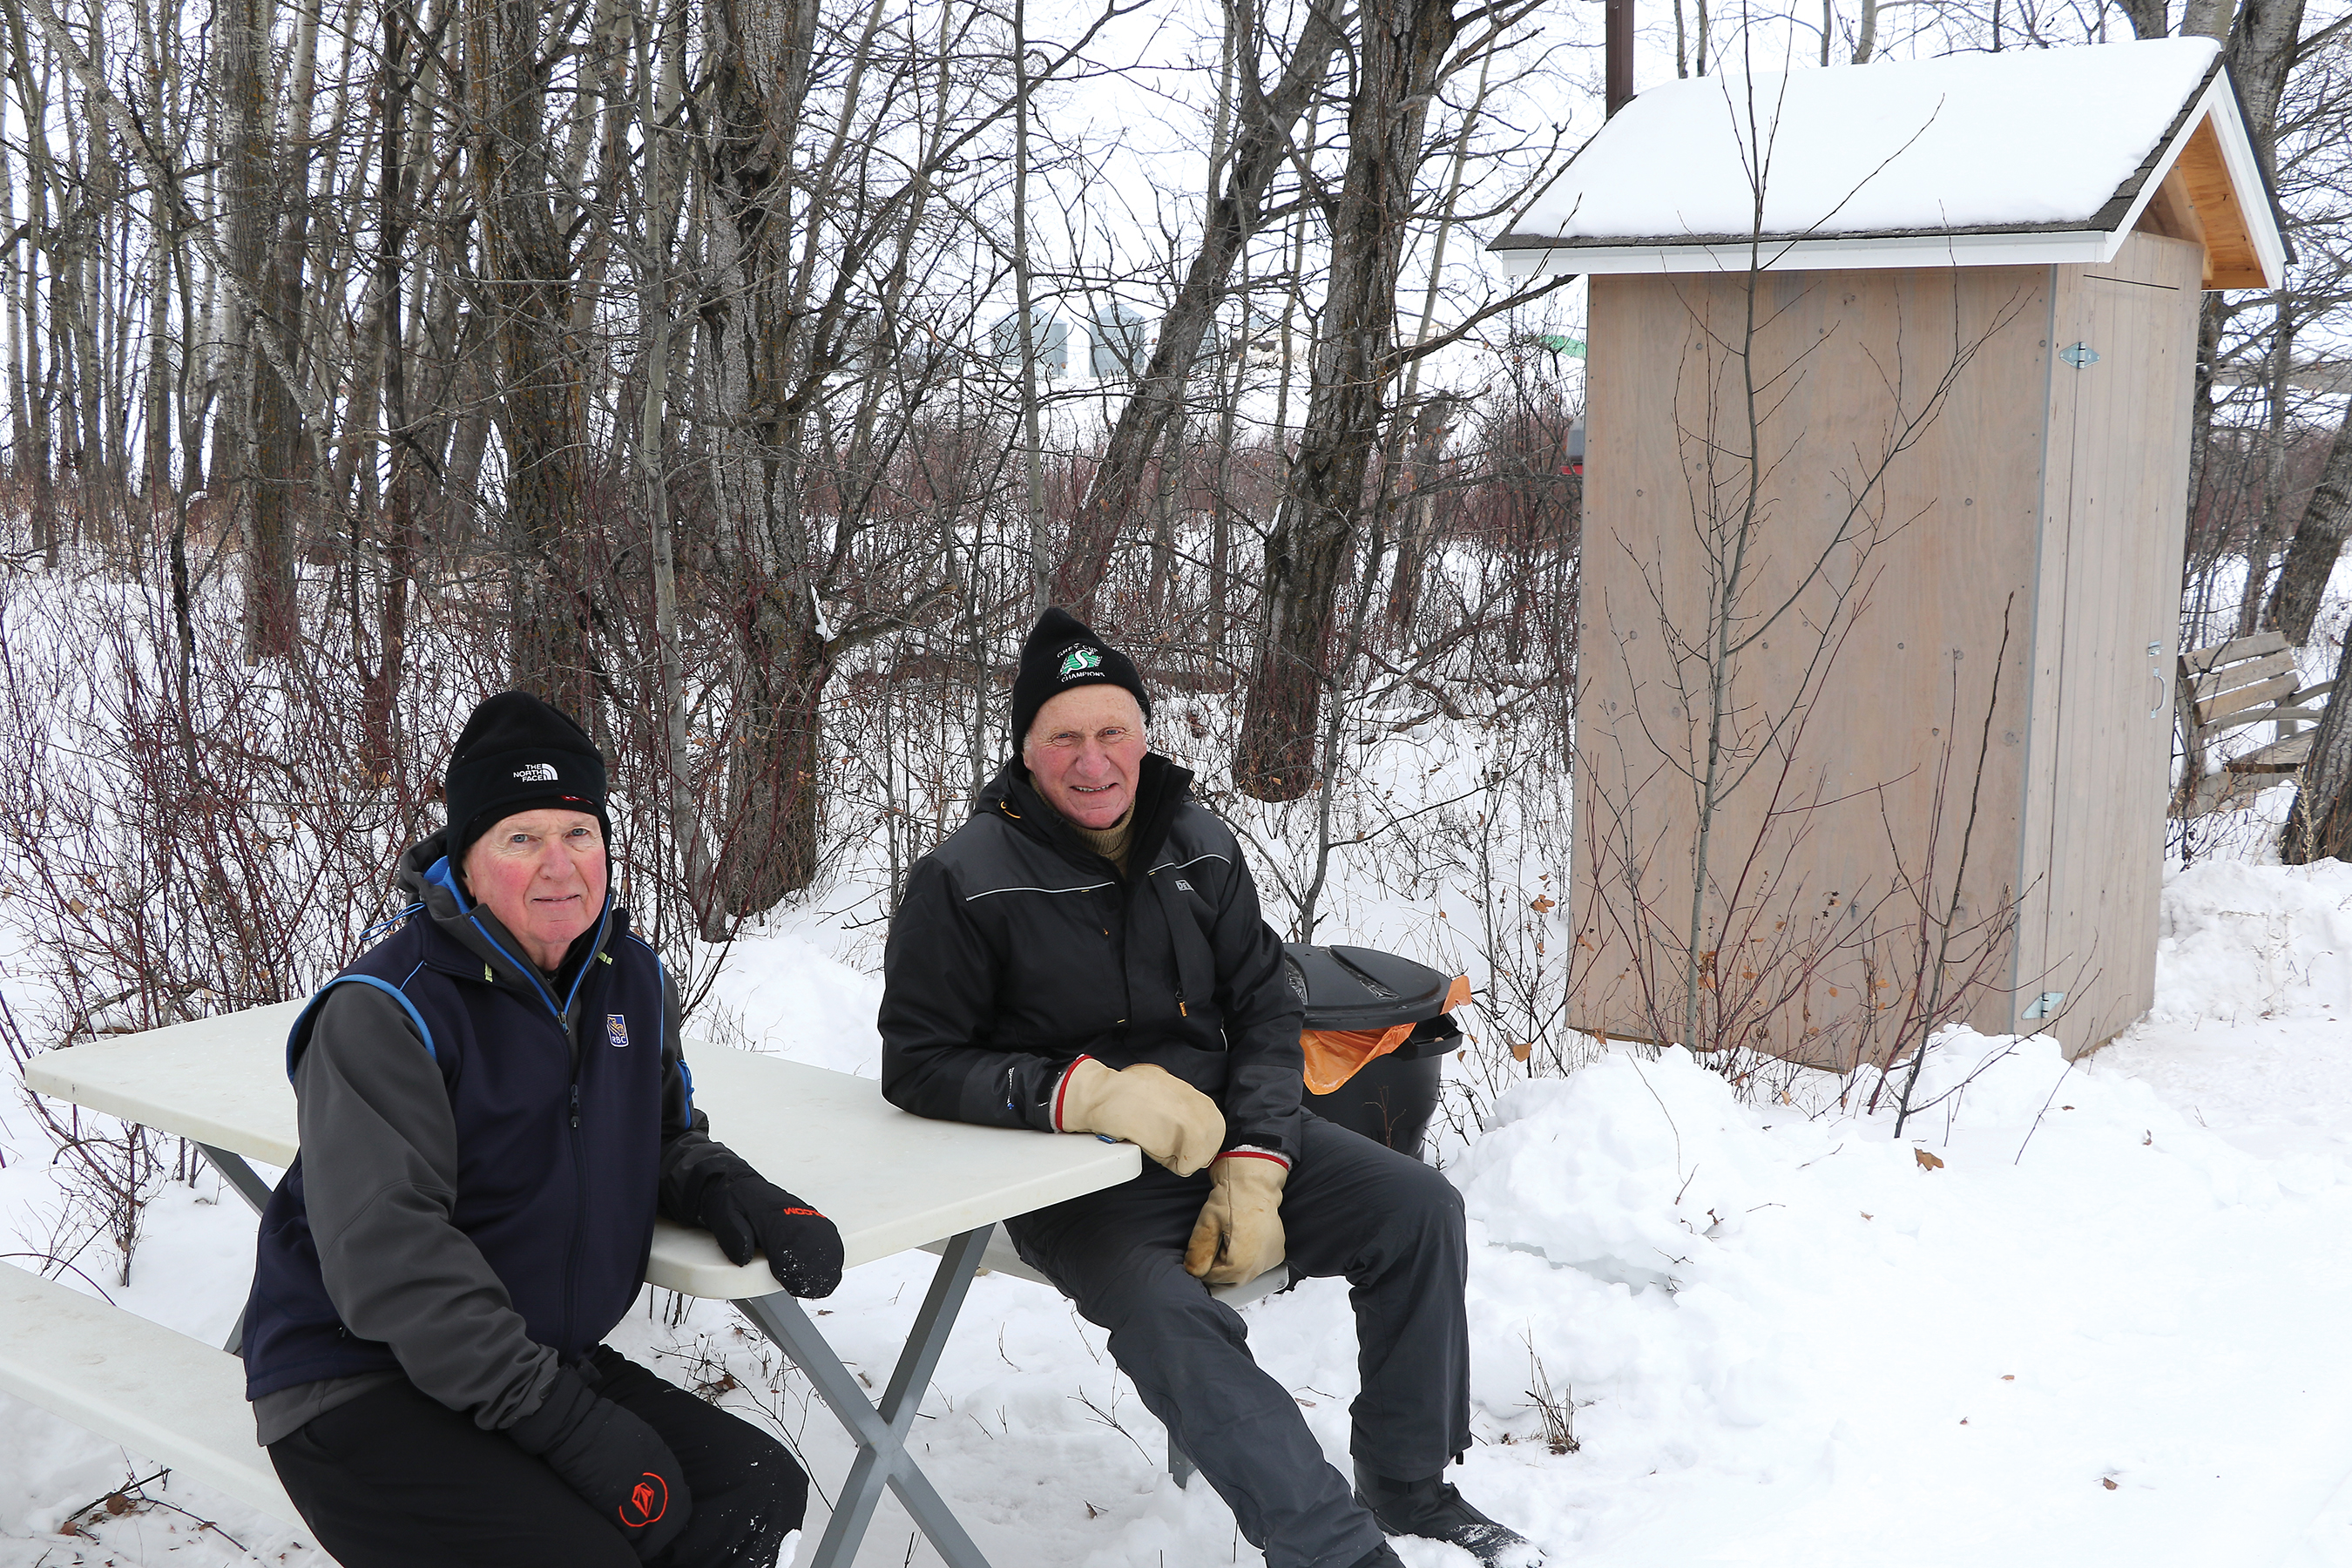 Rocanville Cross-Country Ski Club executives Layne McFarlane (left) and Dennis Hack volunteer their time all year-round to keep the ski trails intact, so that families and friends can enjoy skiing on smooth and safe paths.